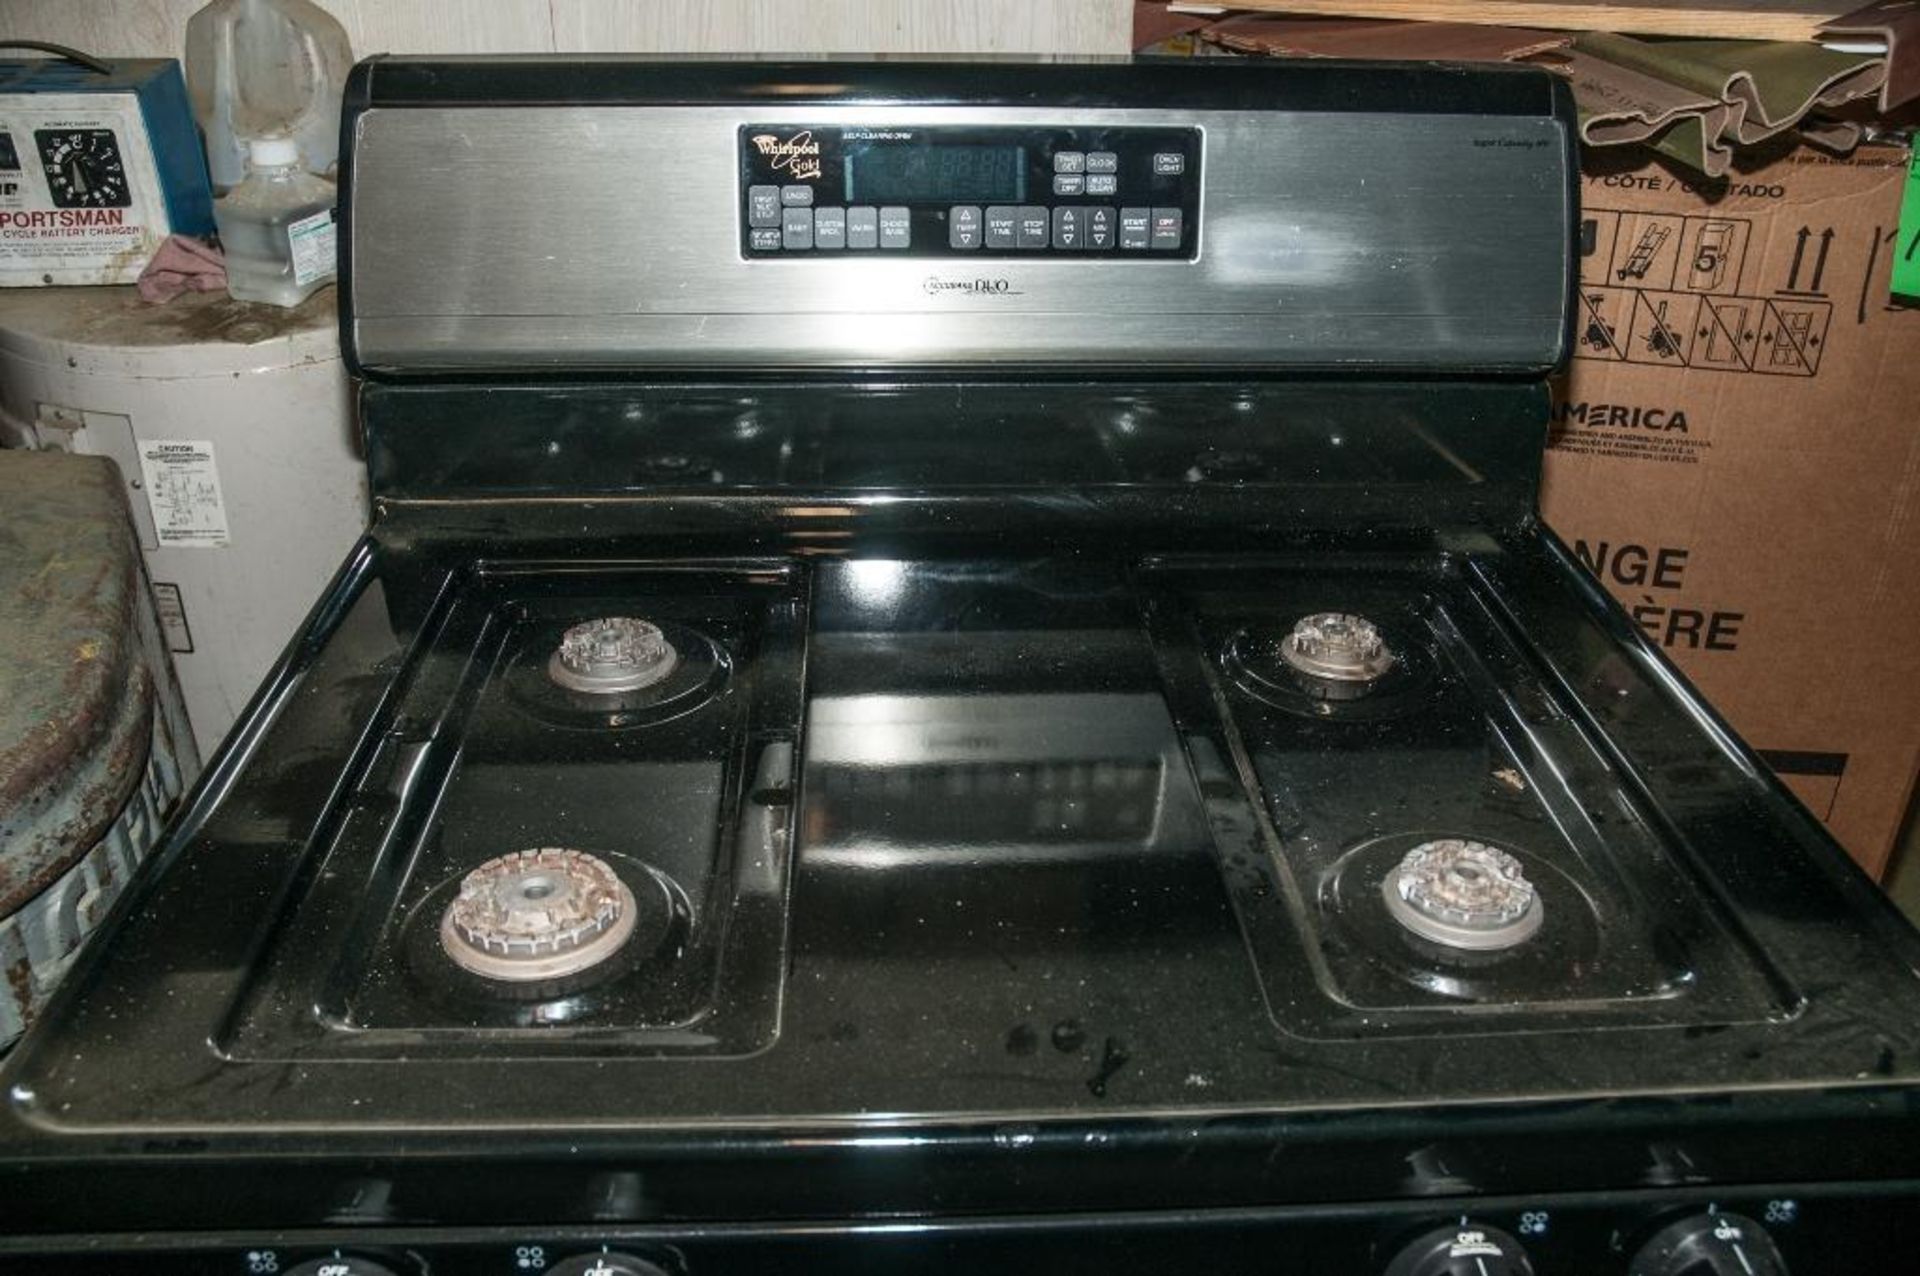 Whirlpool Gold Gas Range, Mdl. GS465LEKS, s/n RM1913340, Used but Very Nice Condition - Image 2 of 4